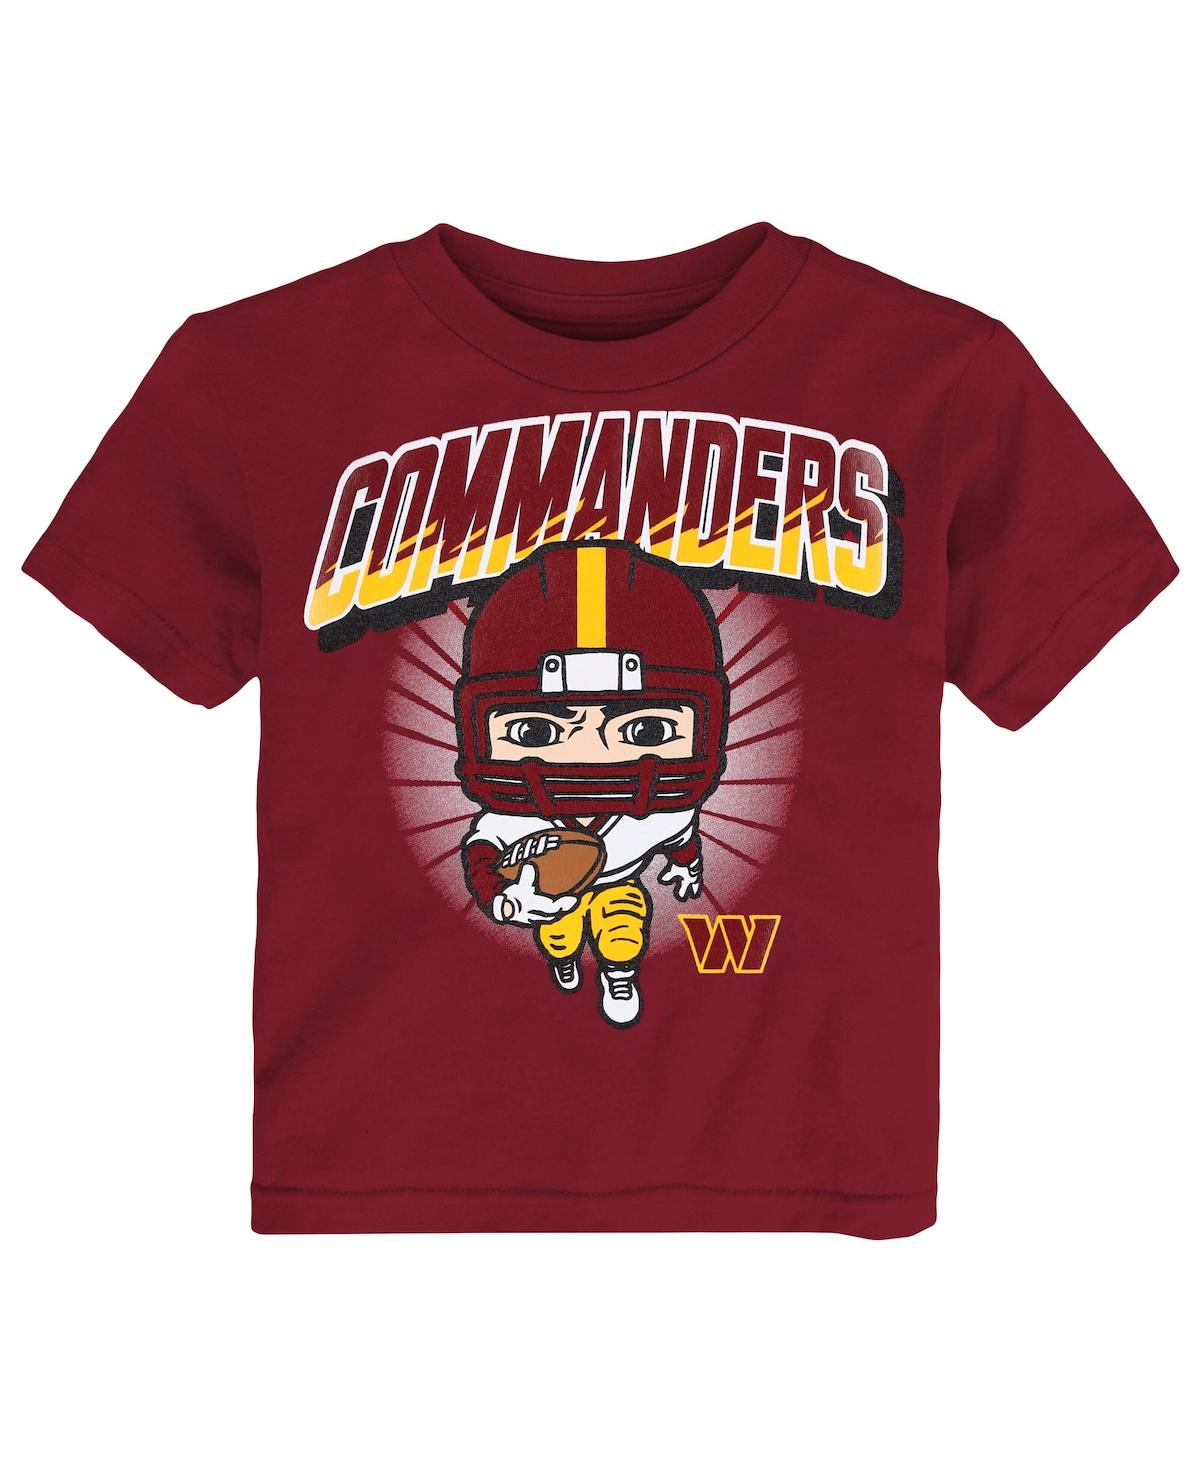 Outerstuff Babies' Toddler Boys And Girls Burgundy Washington Commanders Scrappy T-shirt